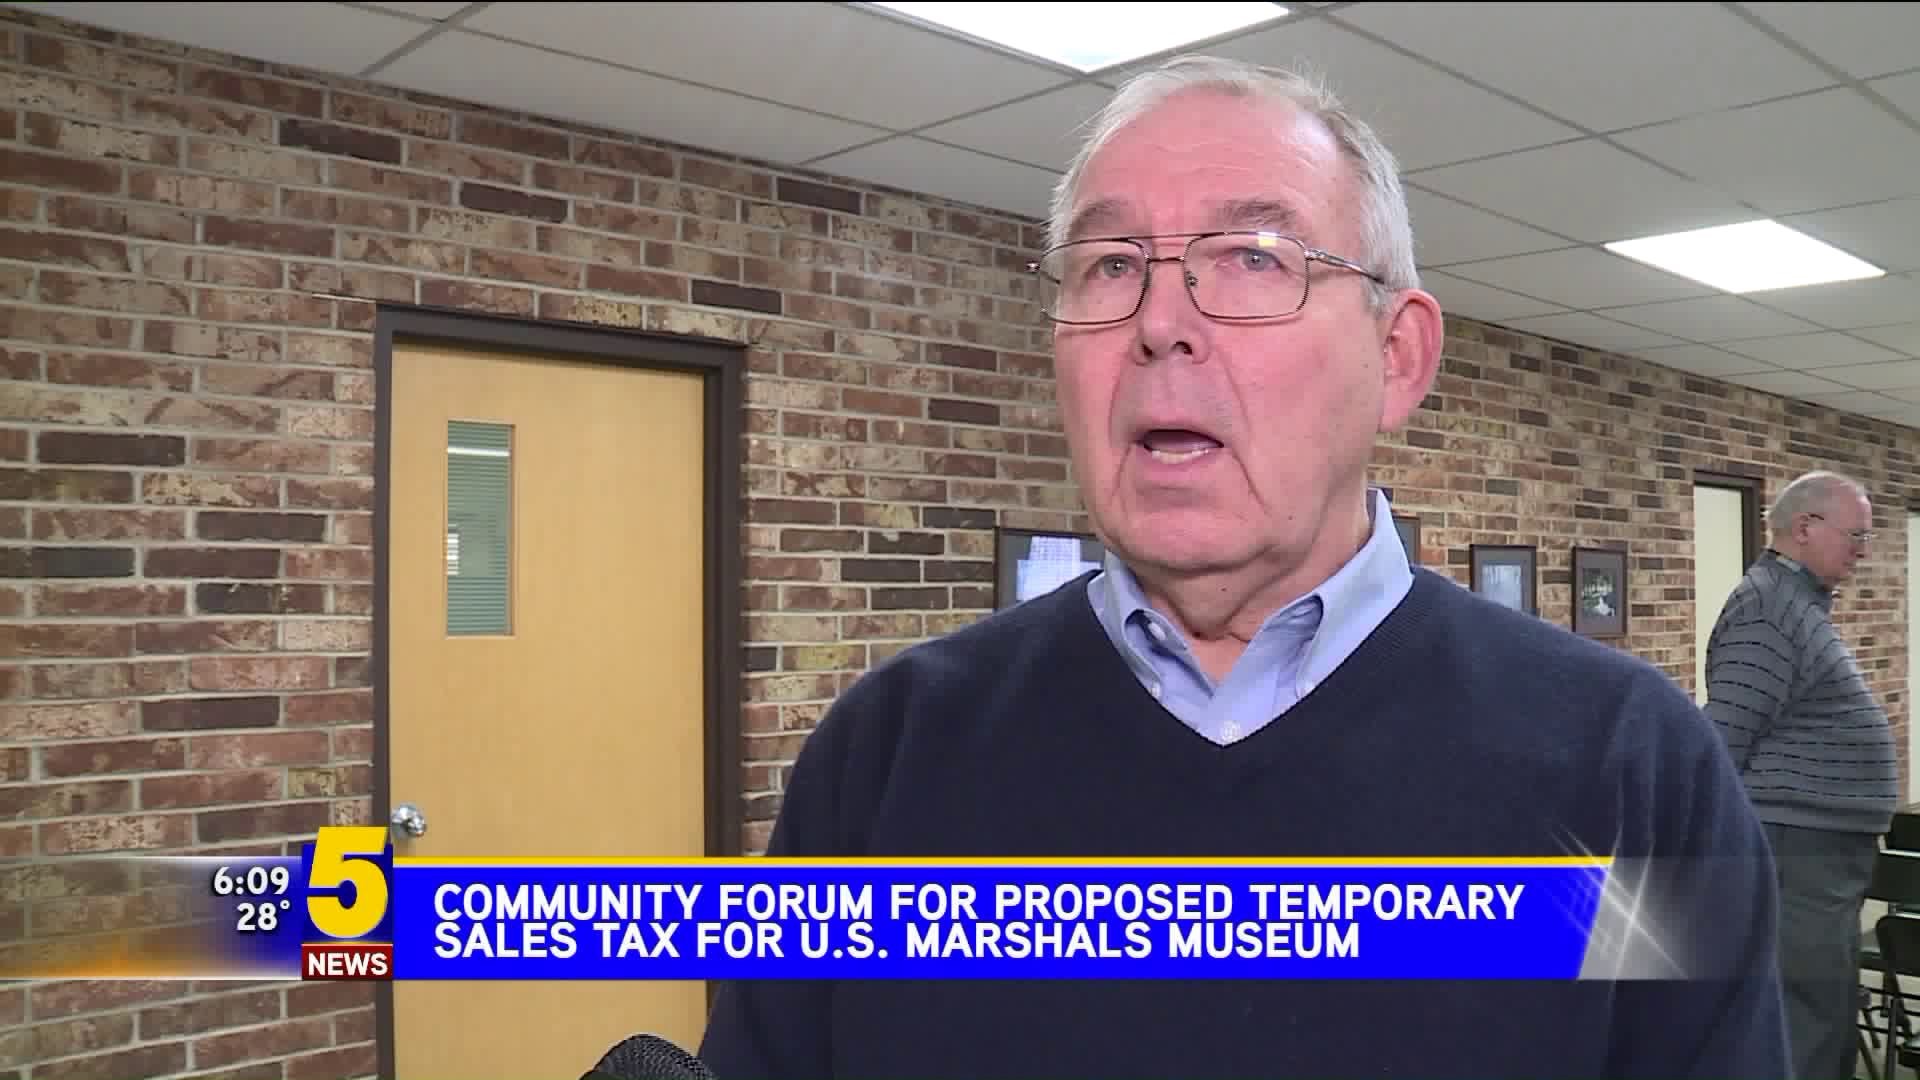 Community Forum Held For Proposed Temporary Salex Tax Increase To Help Fund Marshals Museum